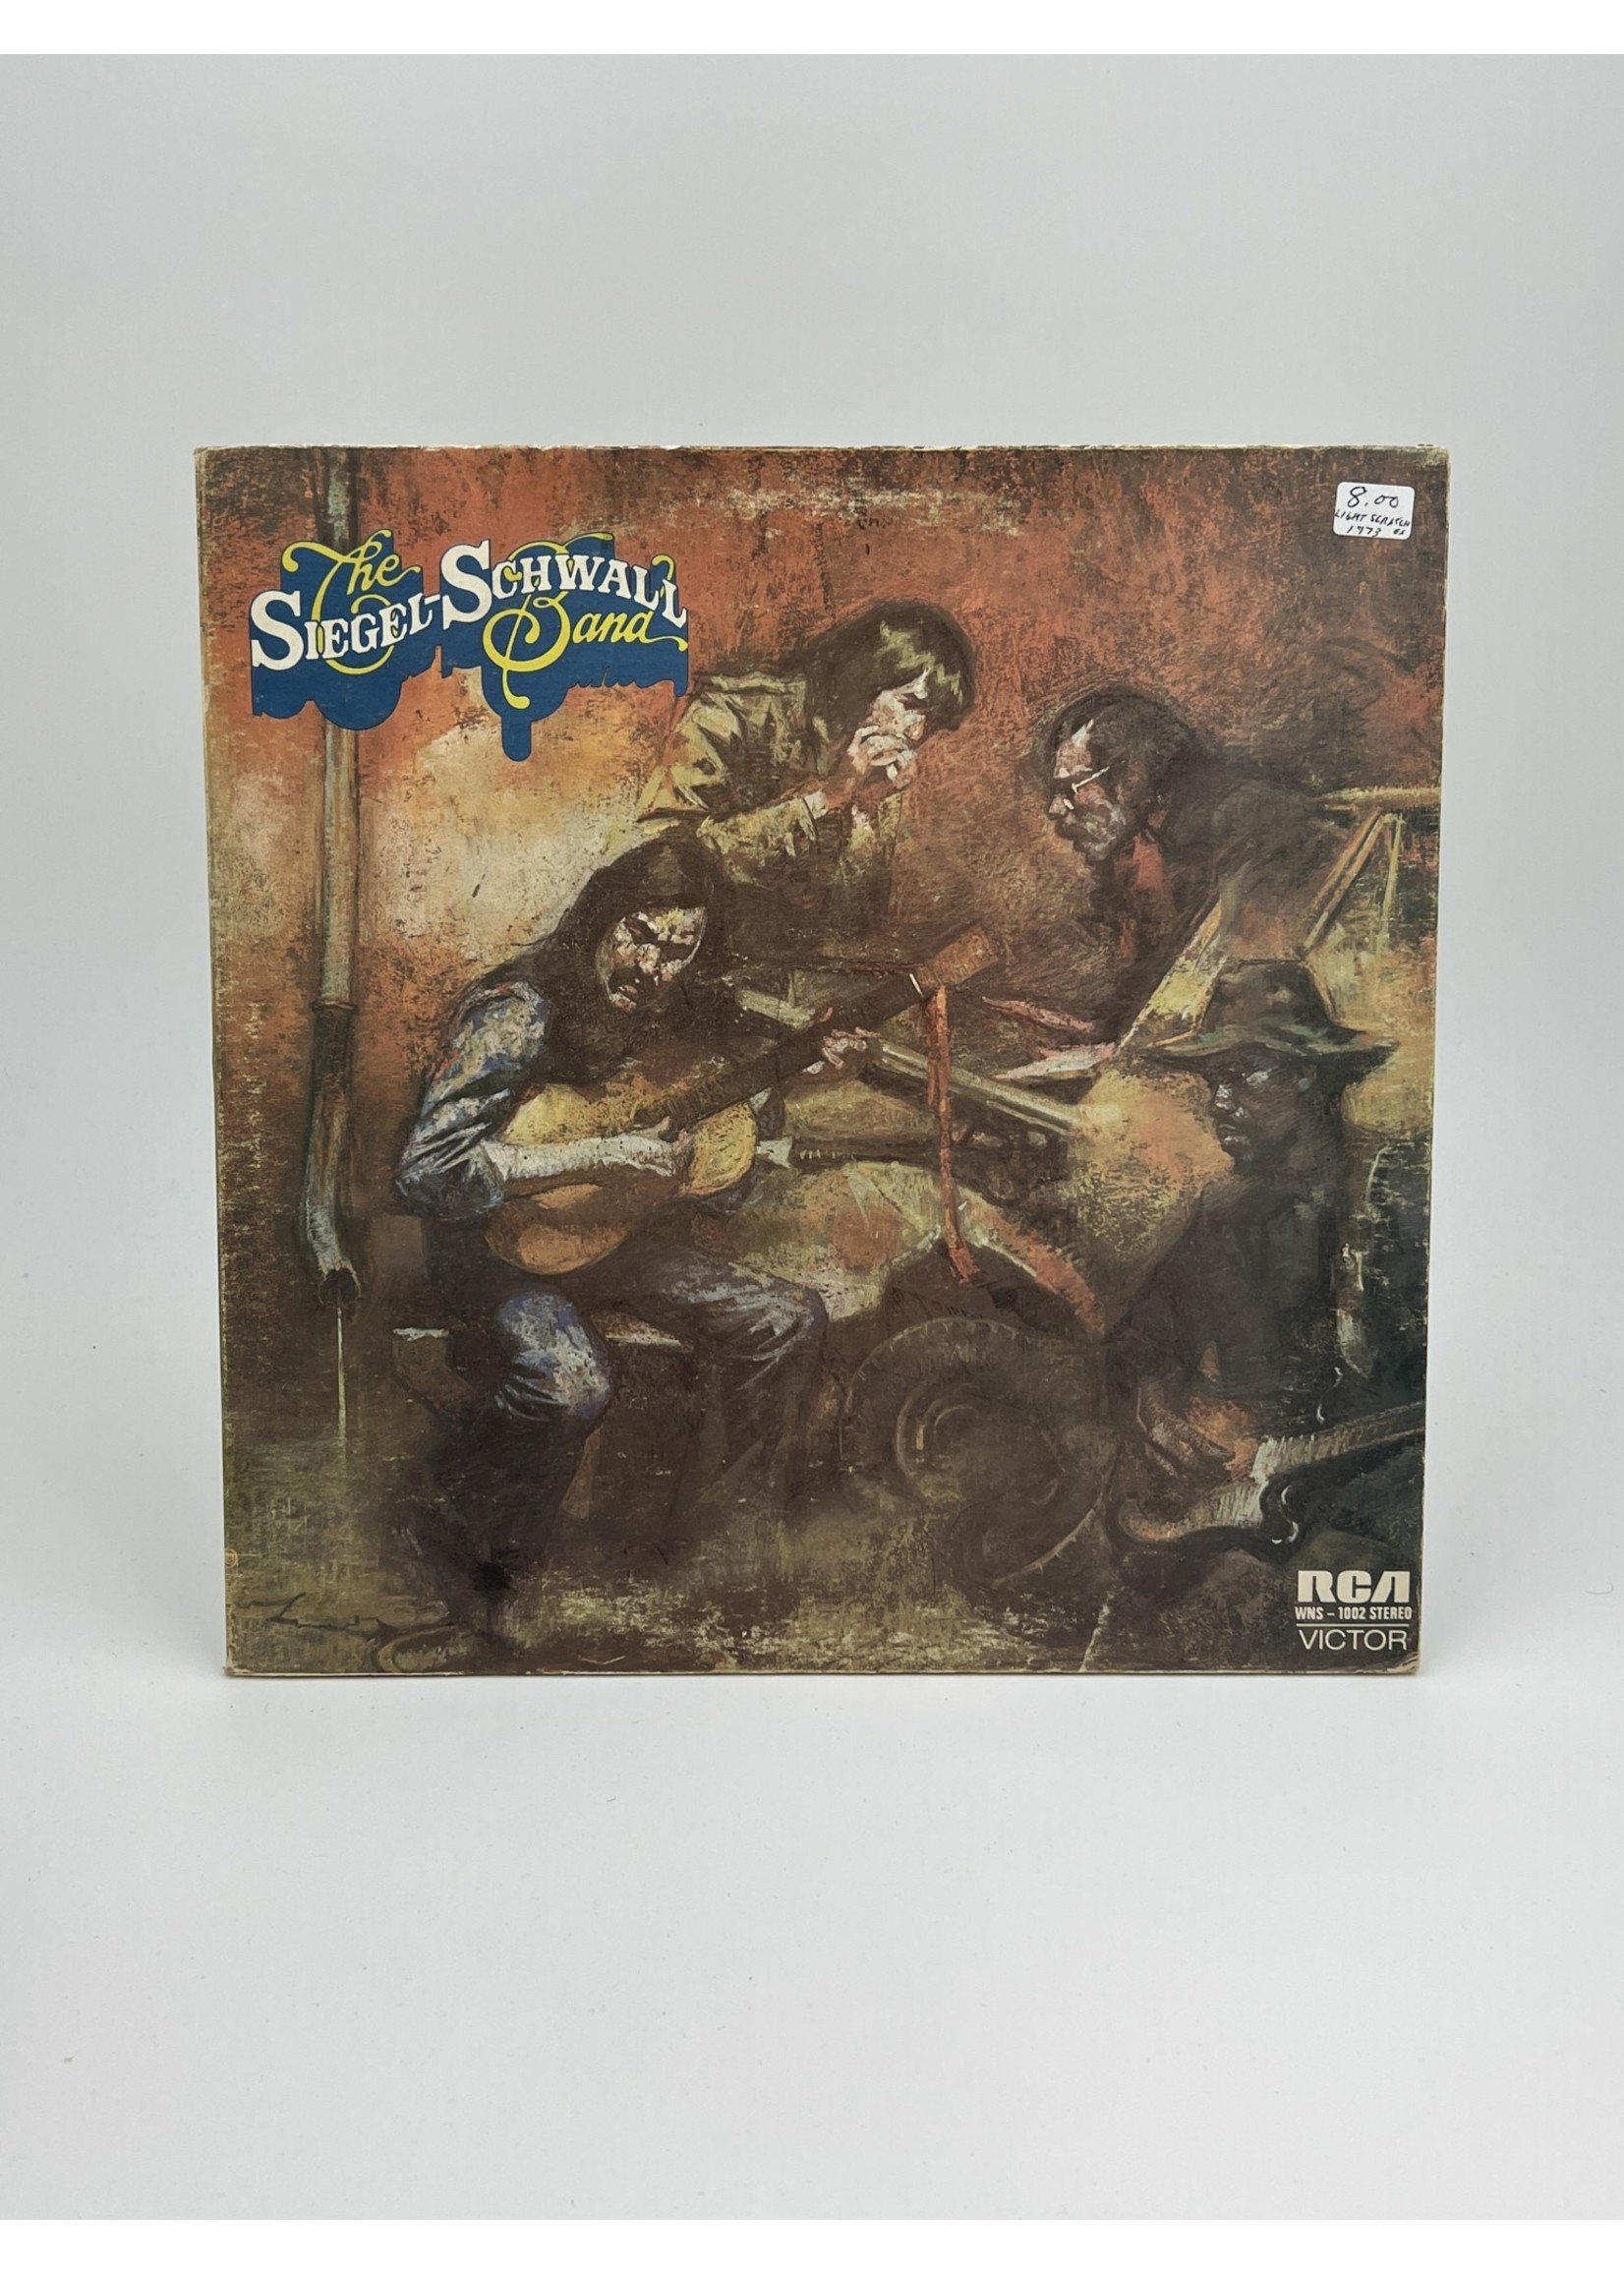 LP The Siegel Schwall Band LP Record